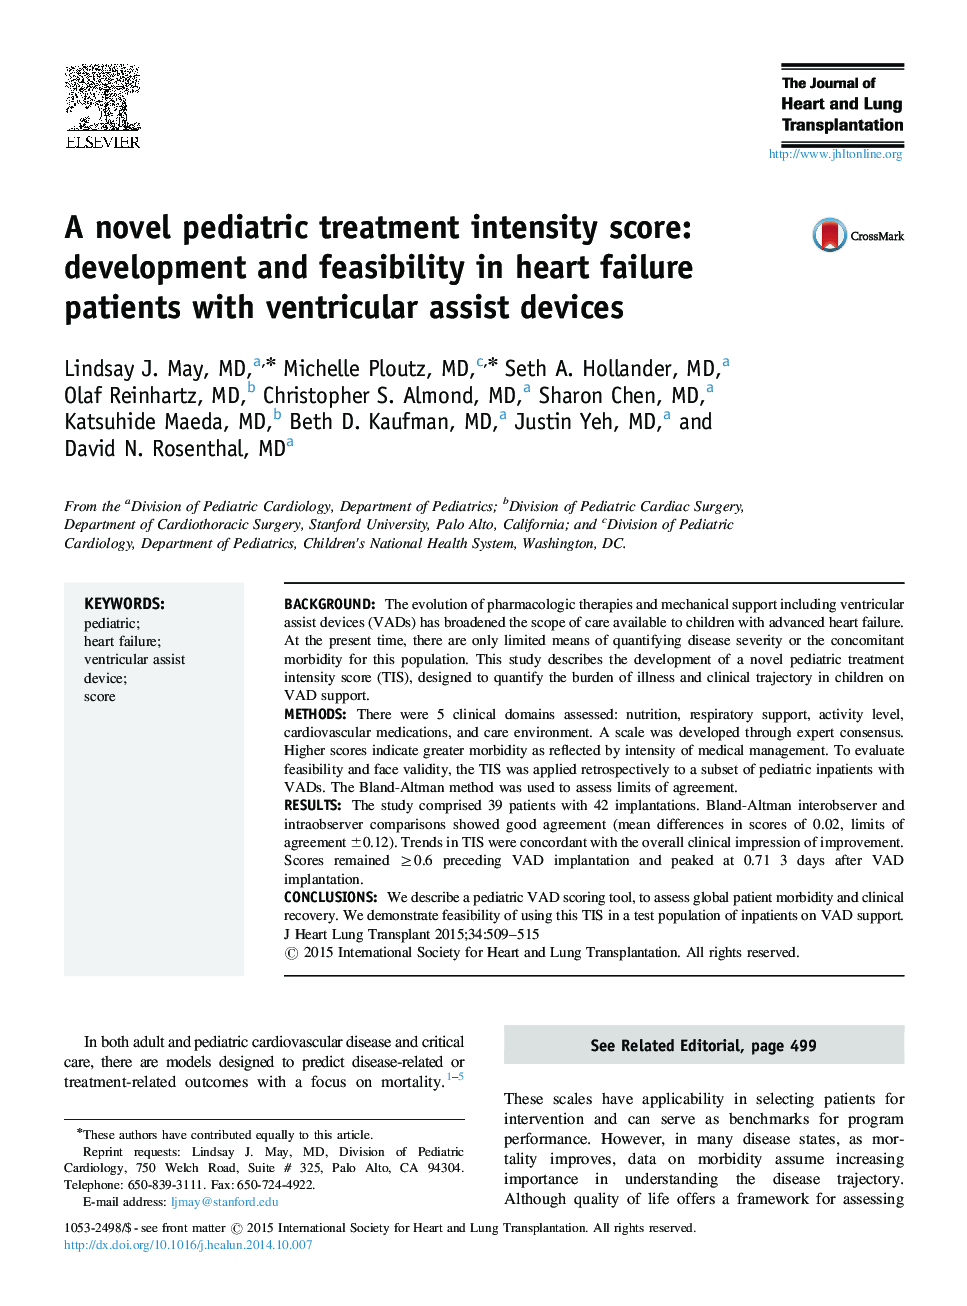 A novel pediatric treatment intensity score: development and feasibility in heart failure patients with ventricular assist devices